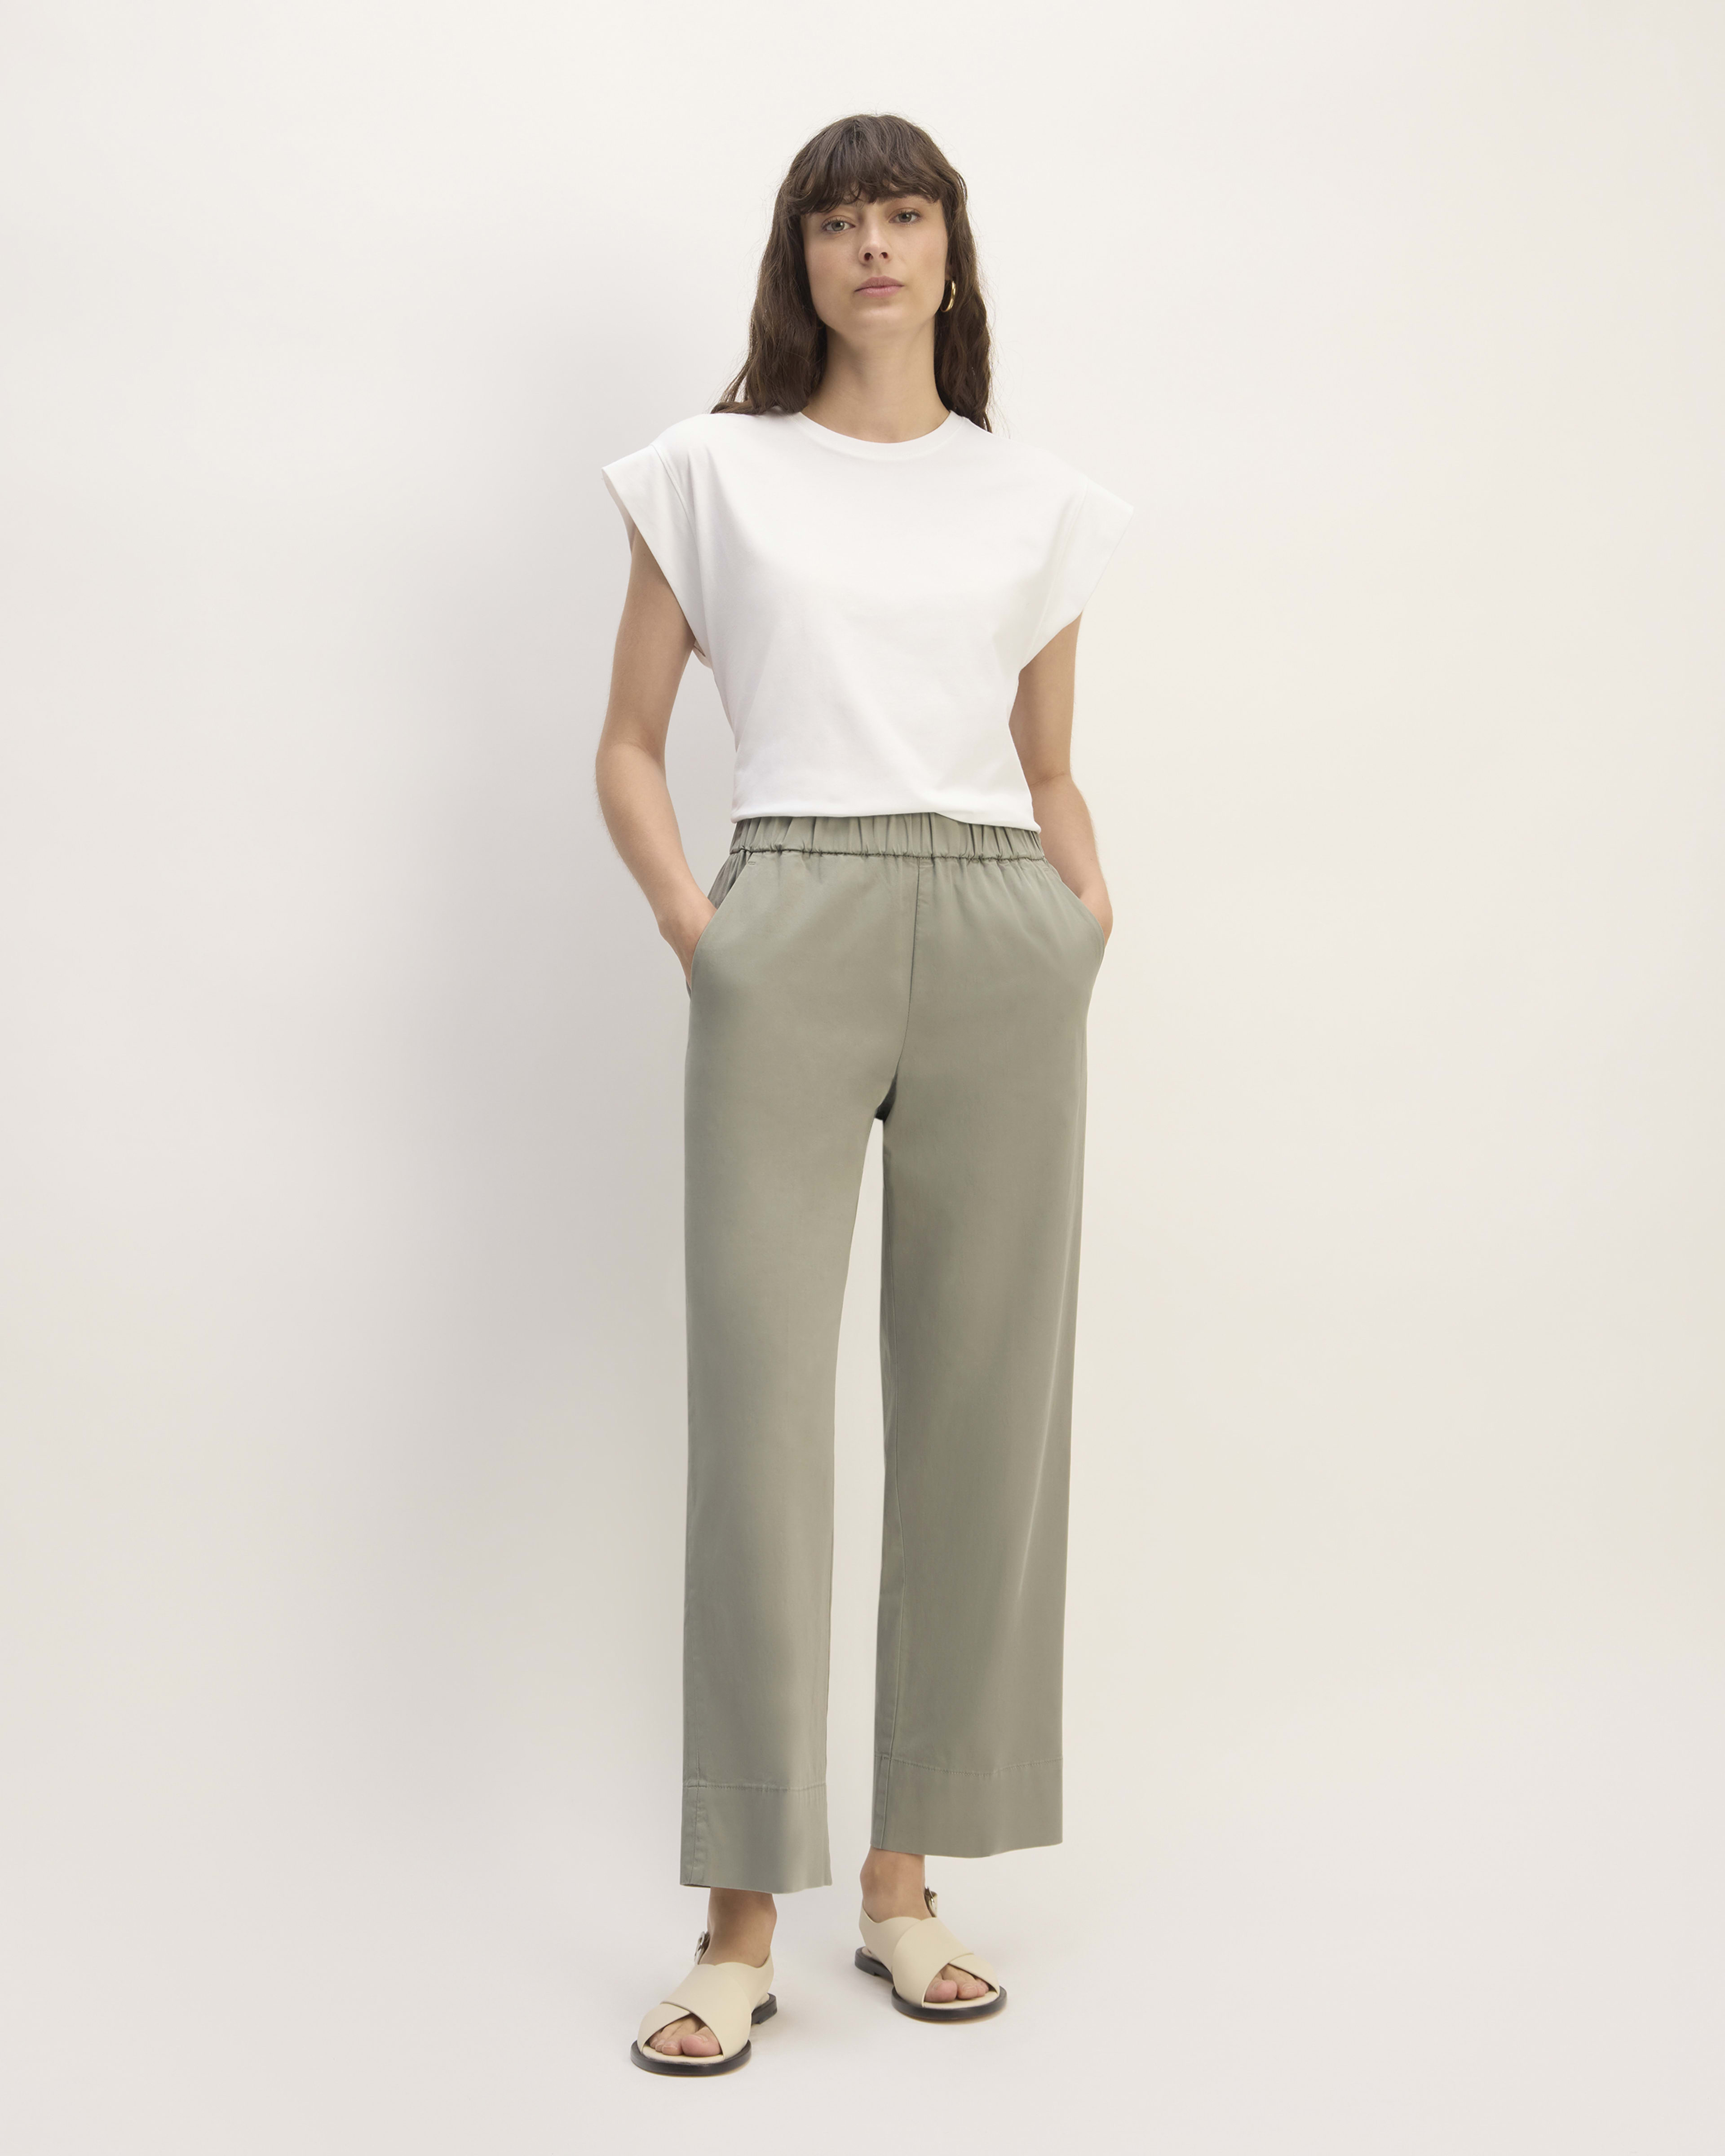 Everlane, @aliisonyu styles The Dream Pant aka the perfect summer to fall  transition pant. #Everlane #EverlaneKickFlarePant #TheKickFlarePant #She